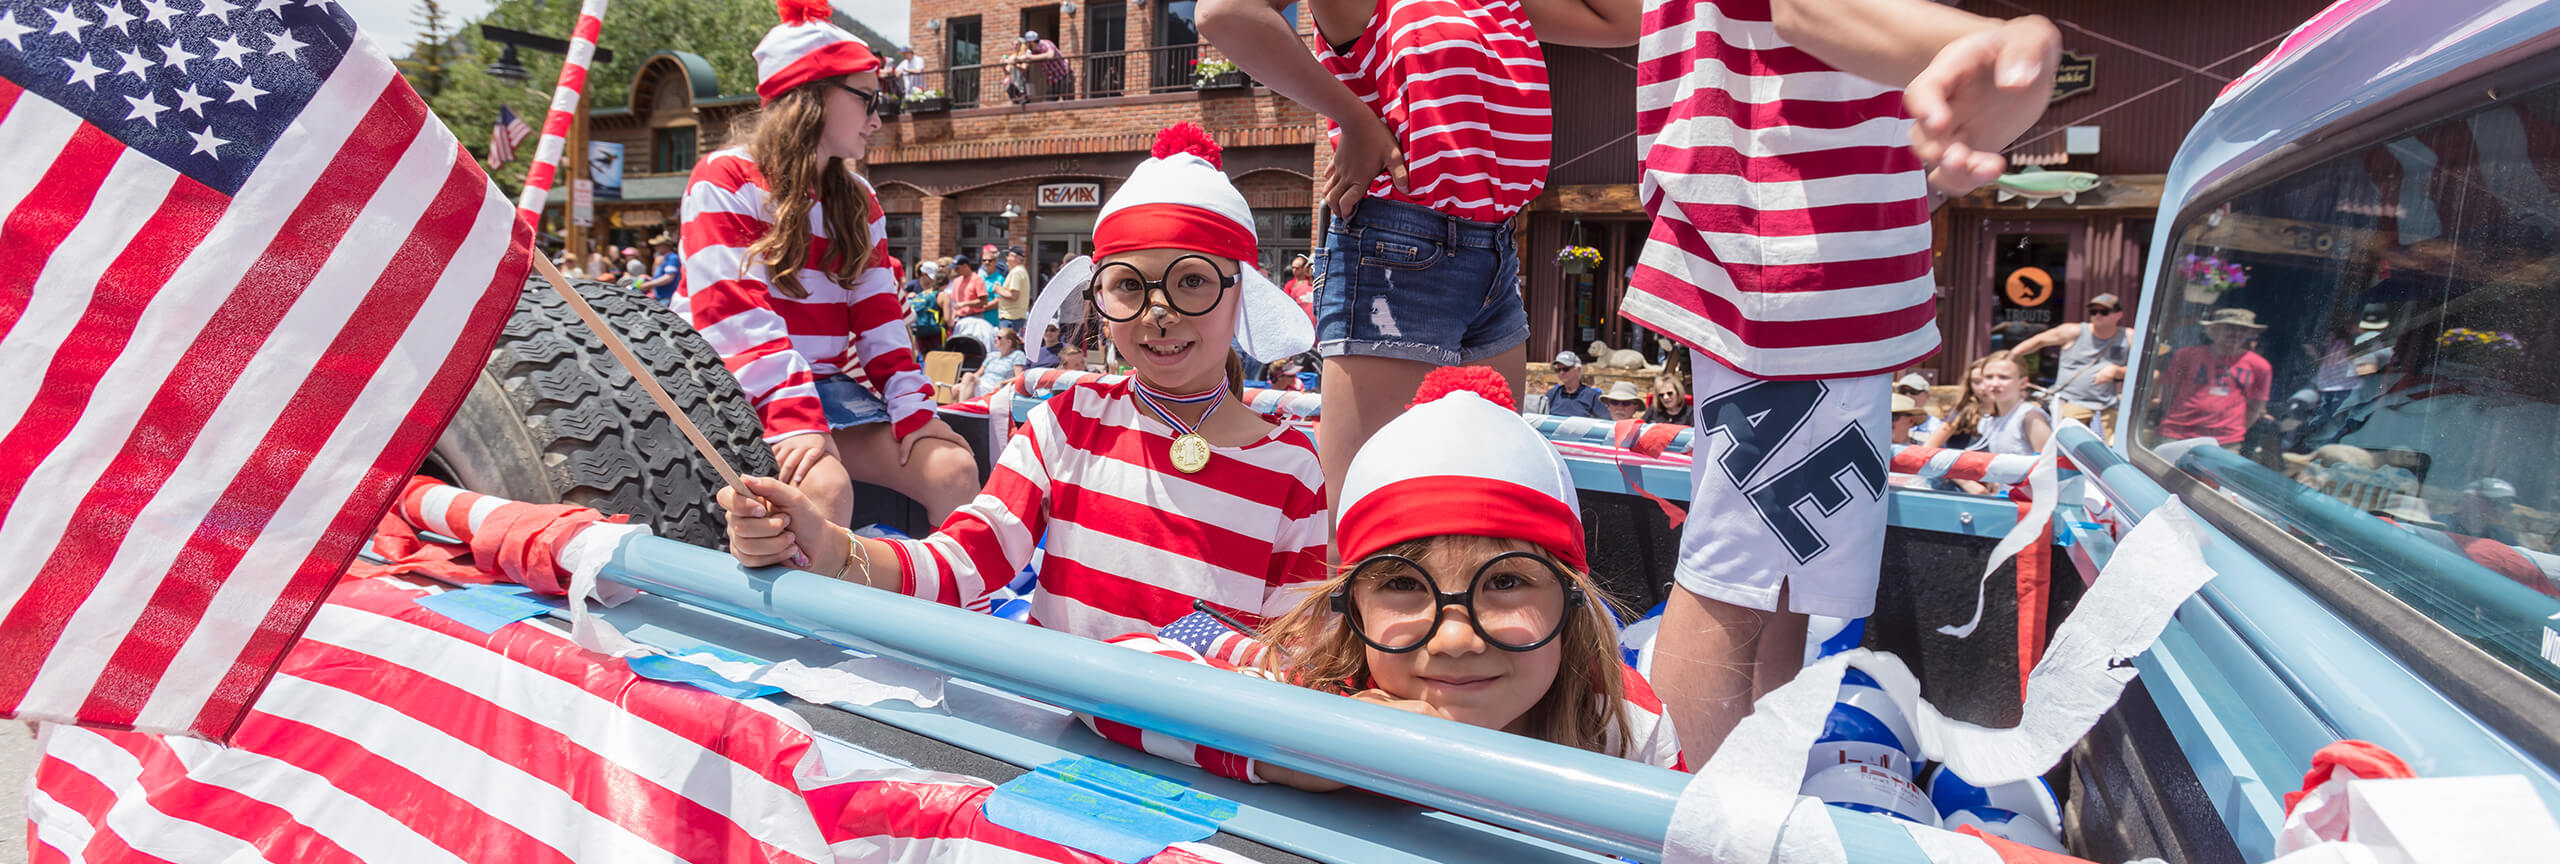 Kids dressed as Where's Waldo in truck in 4th of July Parade